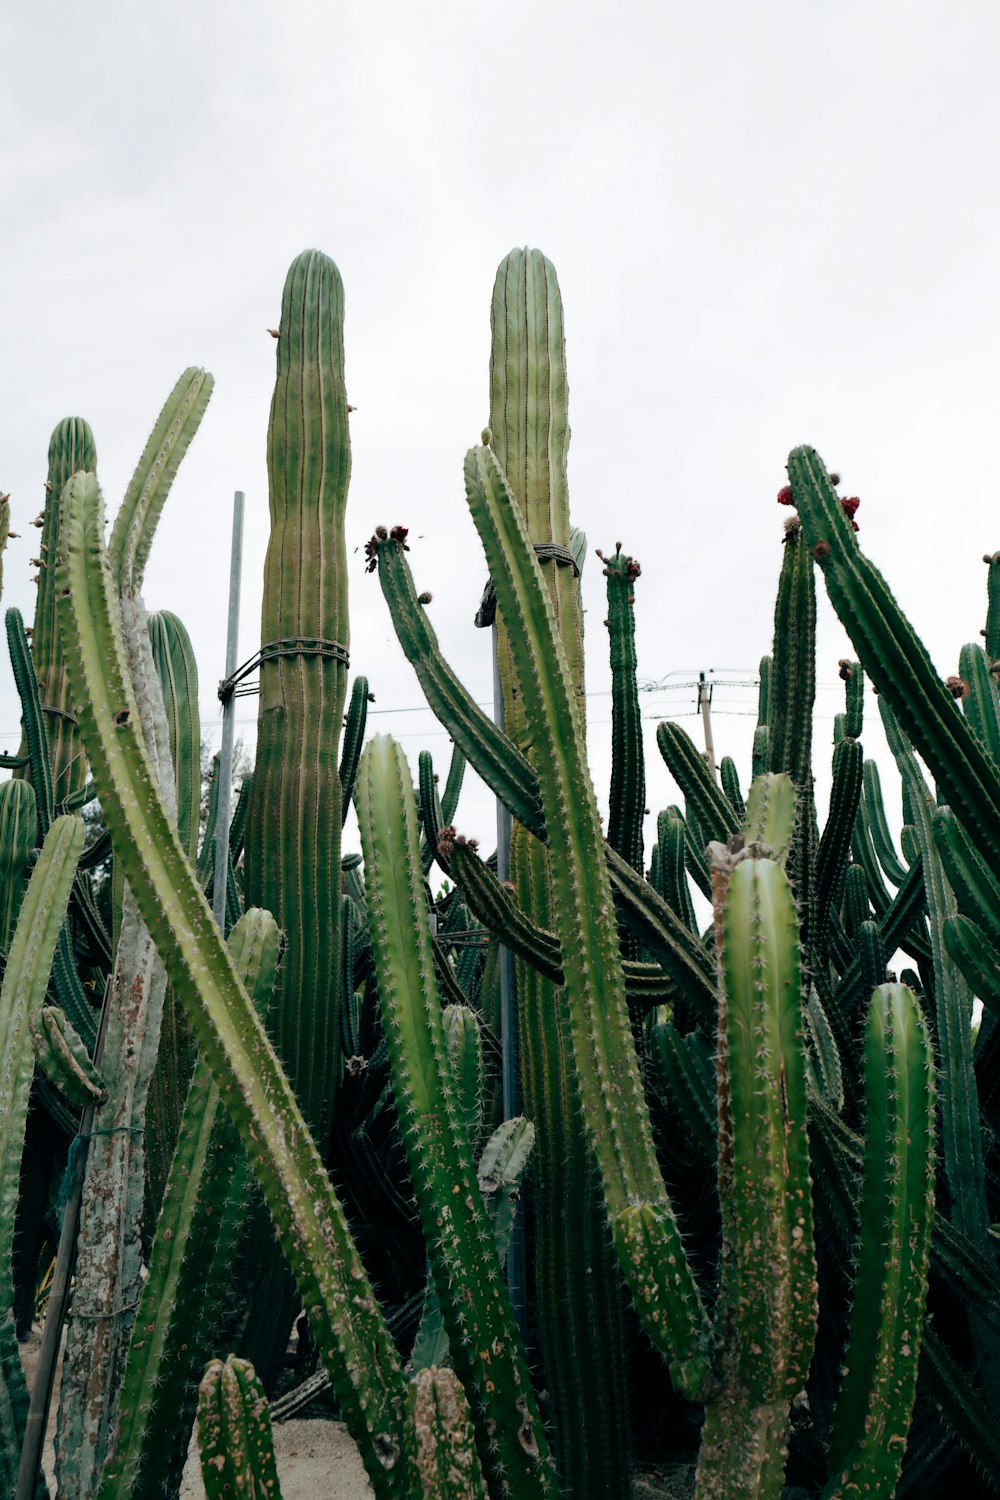 green cactus plants under white sky during daytime